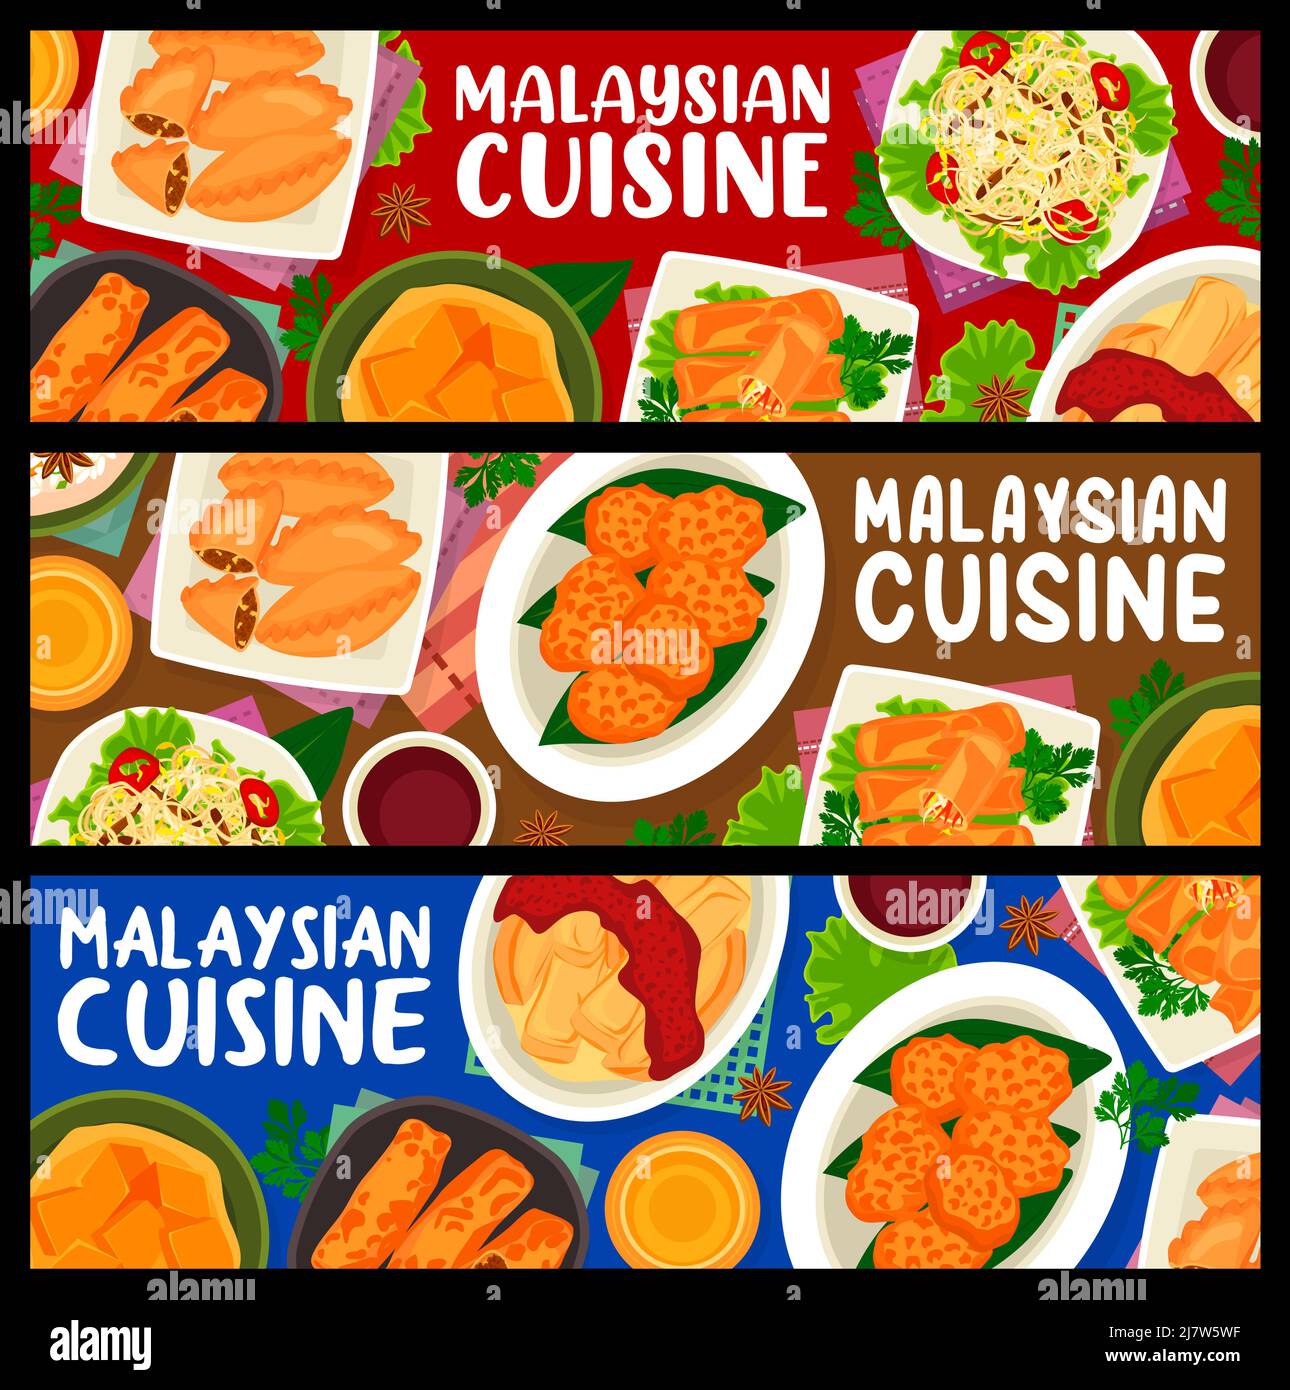 Malaysian cuisine meals banners vector tofu pudding and nasi lemak rice. Prawn noodle soup, braised bean curd with mushrooms and banana leaf rice with beef noodle soup tarditional Malaysia food dishes Stock Vector